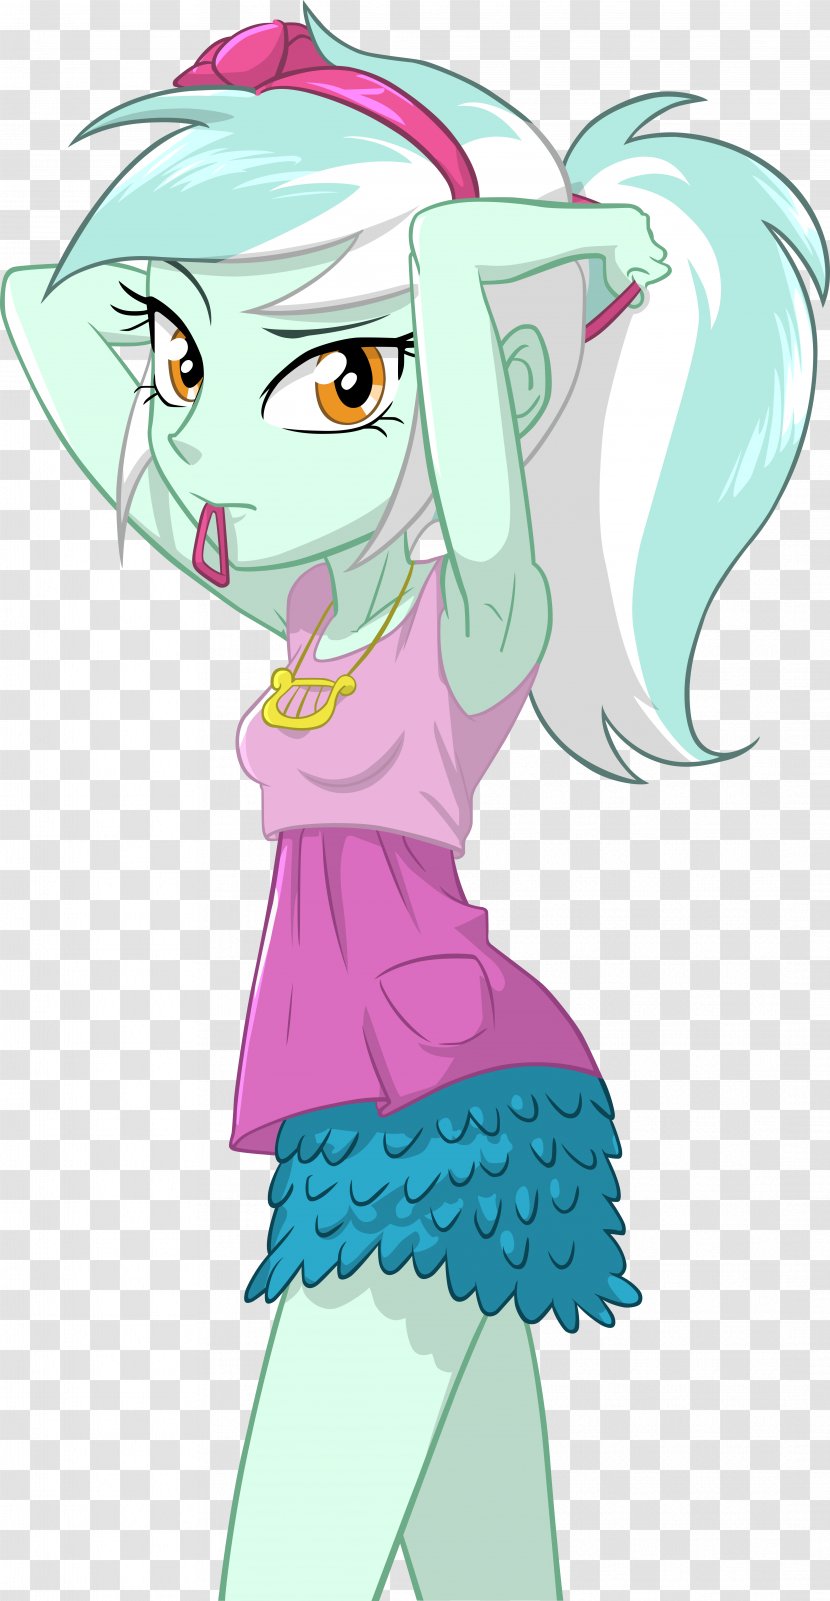 My Little Pony: Equestria Girls Horse Rarity - Flower Transparent PNG